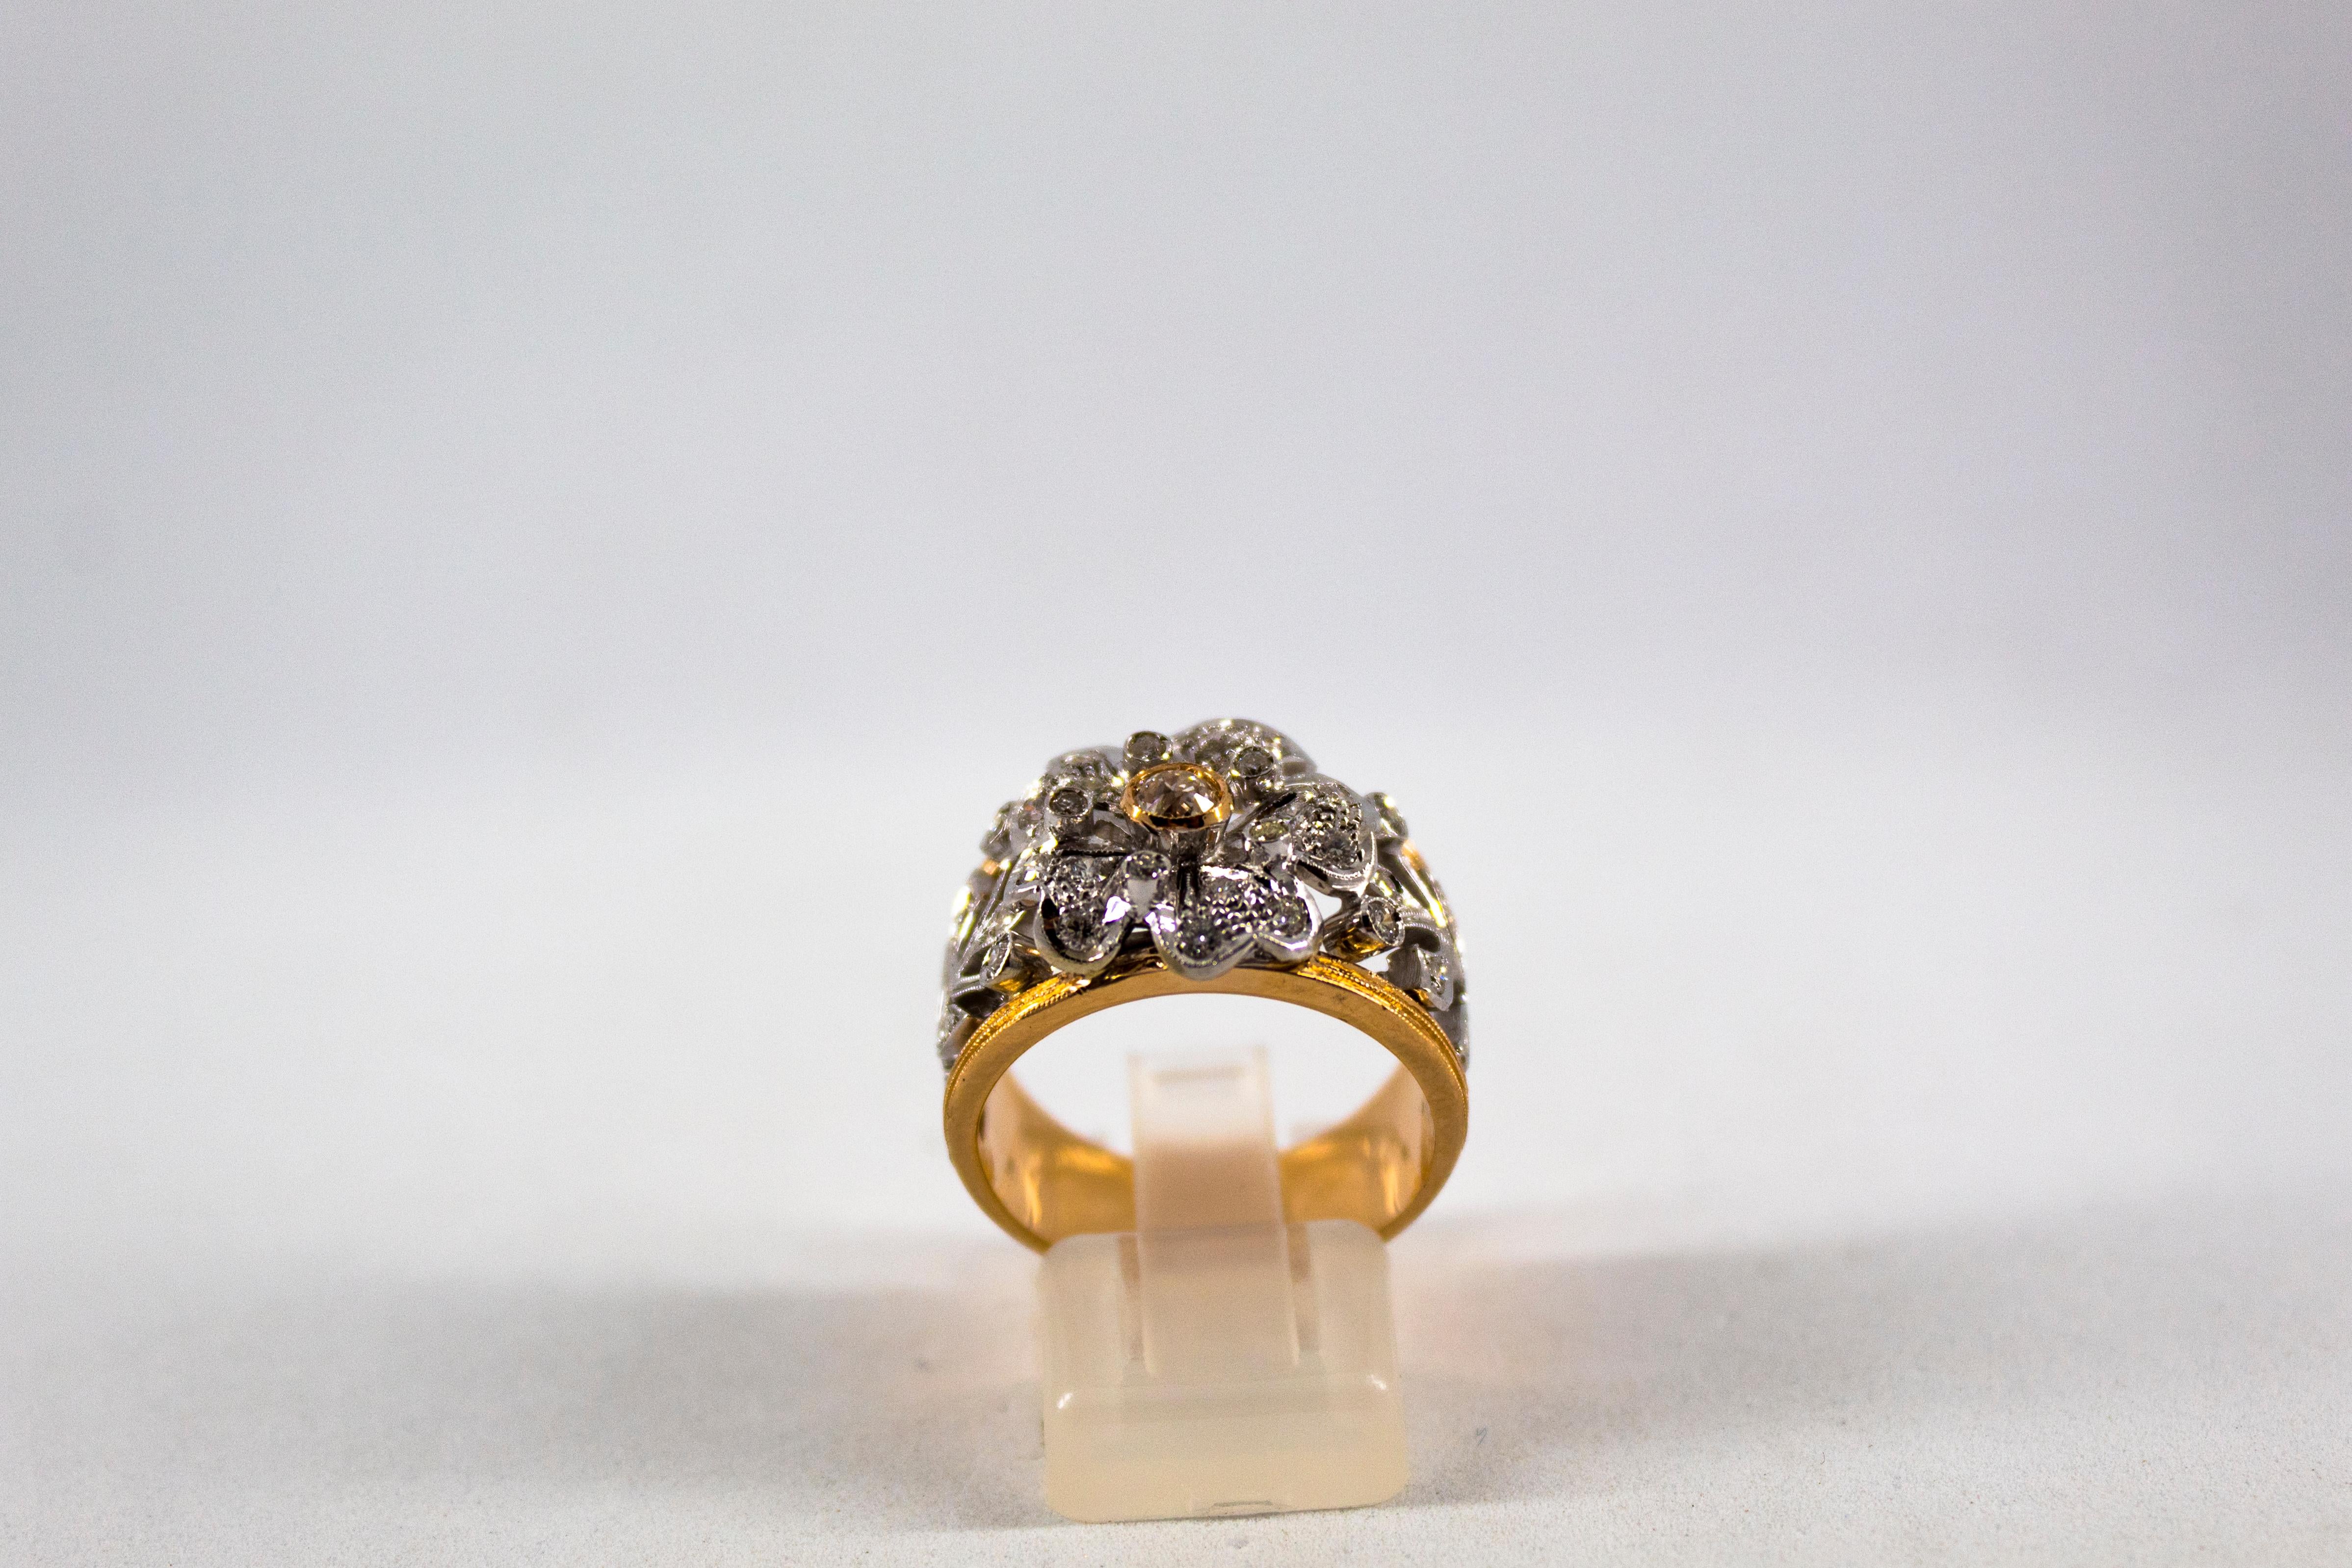 This Ring is made of 14K Yellow Gold.
This Ring has 0.70 Carats of White Diamonds.
This Ring is available also with different central stone: it's available with Emerald, Ruby or Blue Sapphire.
Size ITA: 17 USA: 8
We're a workshop so every piece is